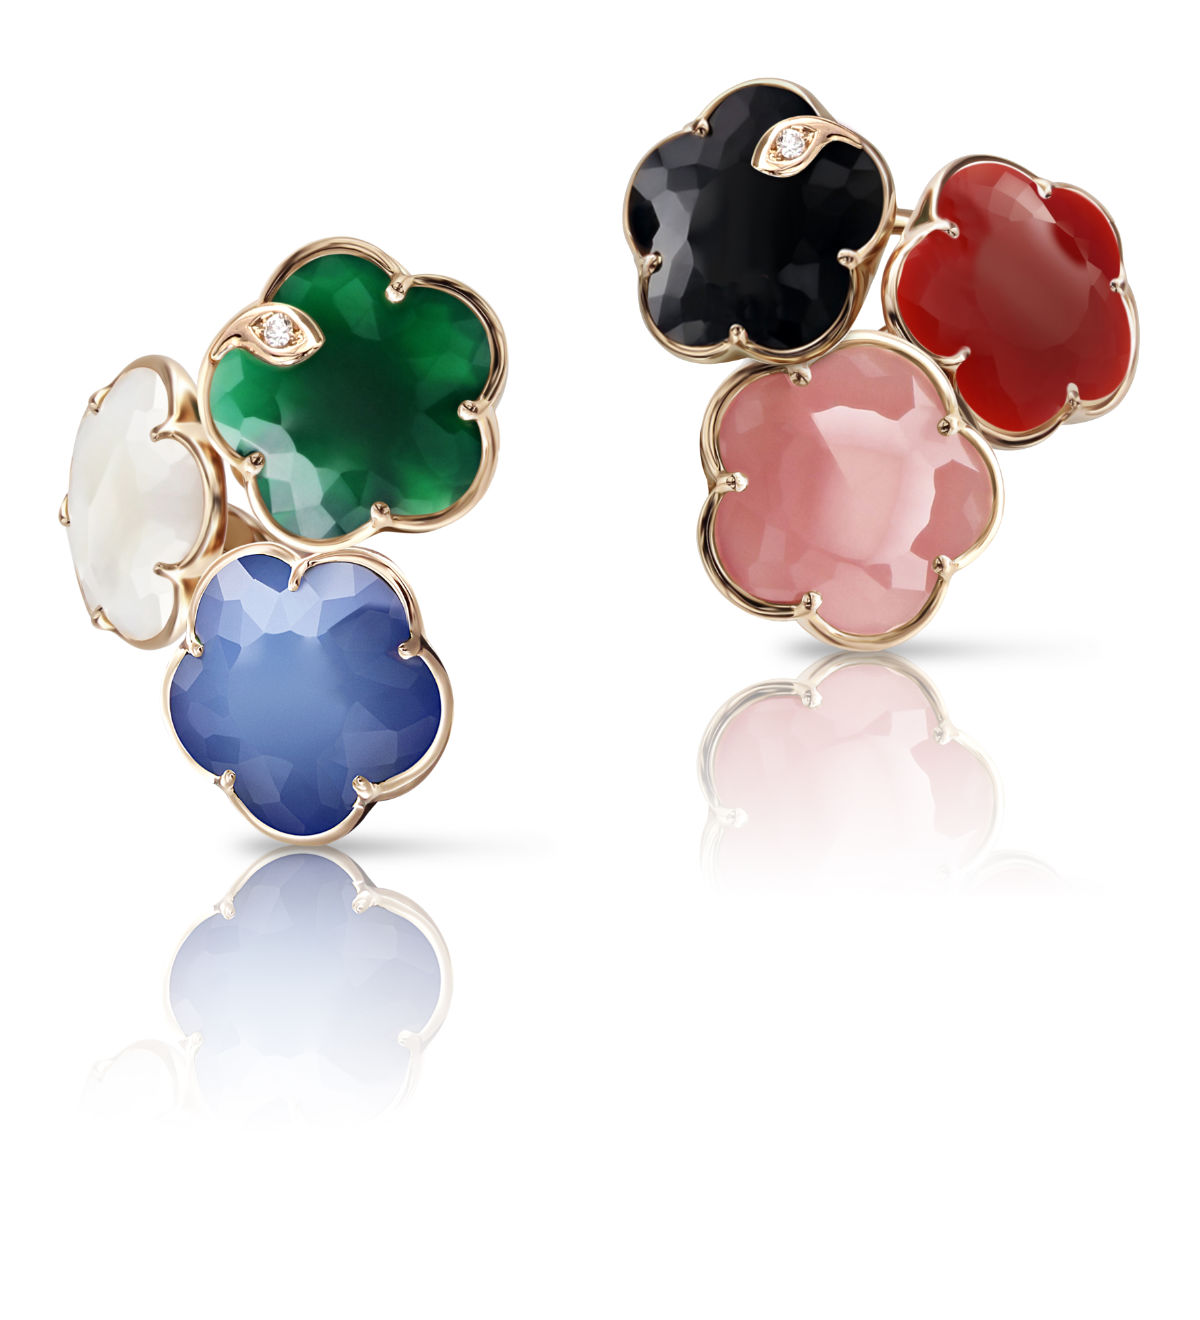 Pasquale Bruni Welcomes Summer Days With The New Petit Joli Bouquet Collection